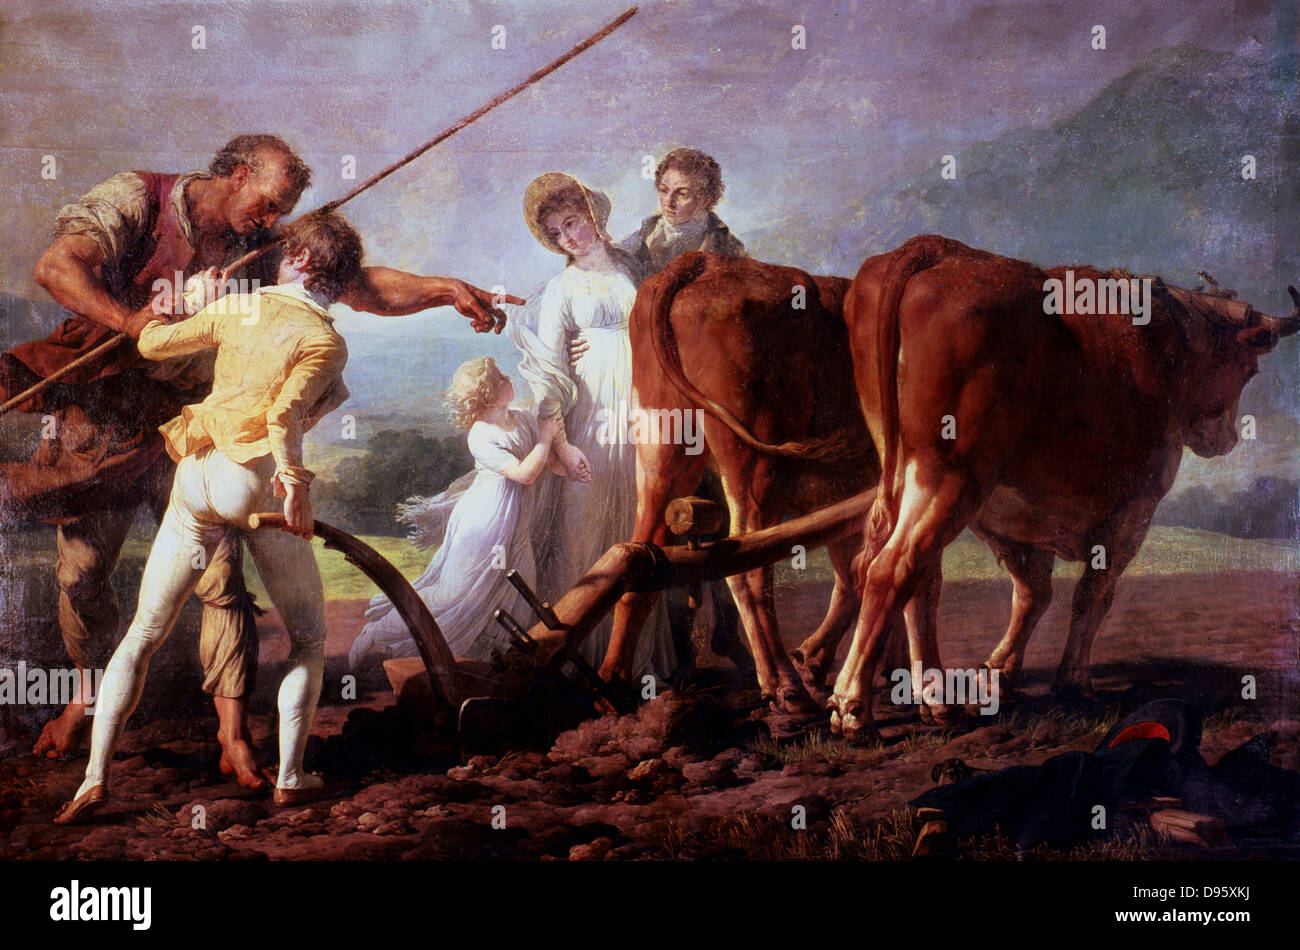 The Ploughing Lesson'.   Barefoot peasant ploughman teaching  the art of ploughing with a team of oxen to a young gentleman in fashionable clothing wbhile the boyu's parents and sister look on.  A Vincent (1746-1816). Musee des Beaux Arts, Bordeaux. Stock Photo